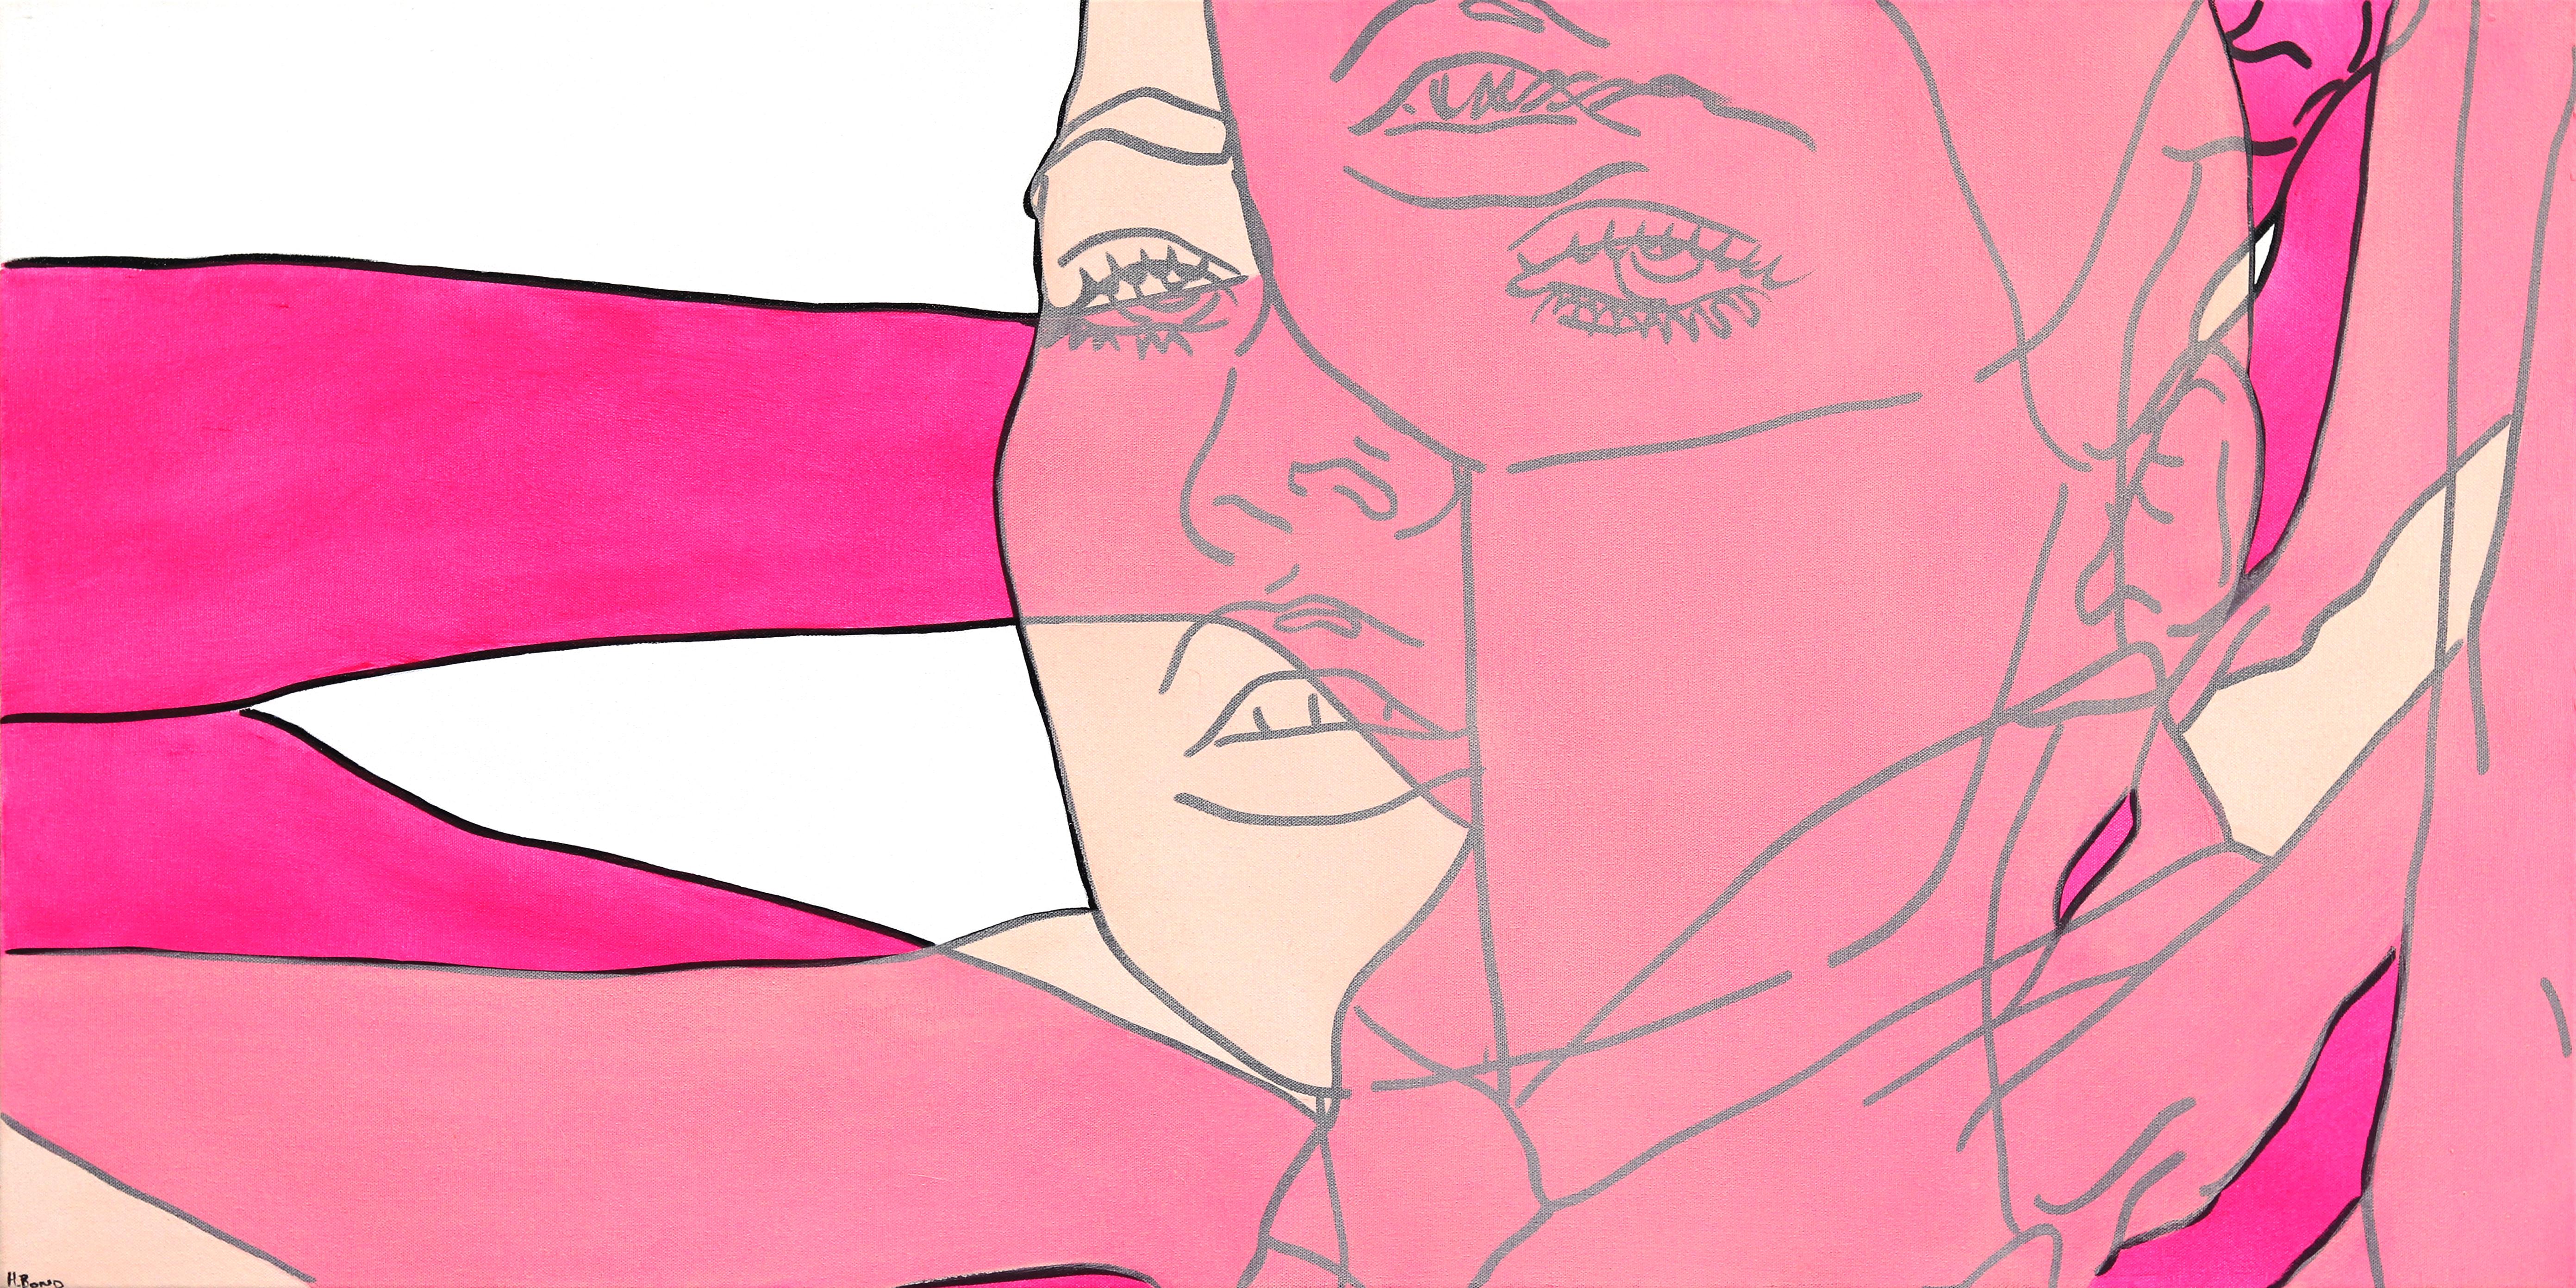 Hilary Bond Abstract Painting - Untitled (Pinks XV) - Figurative Portrait Woman Pop Art Painting